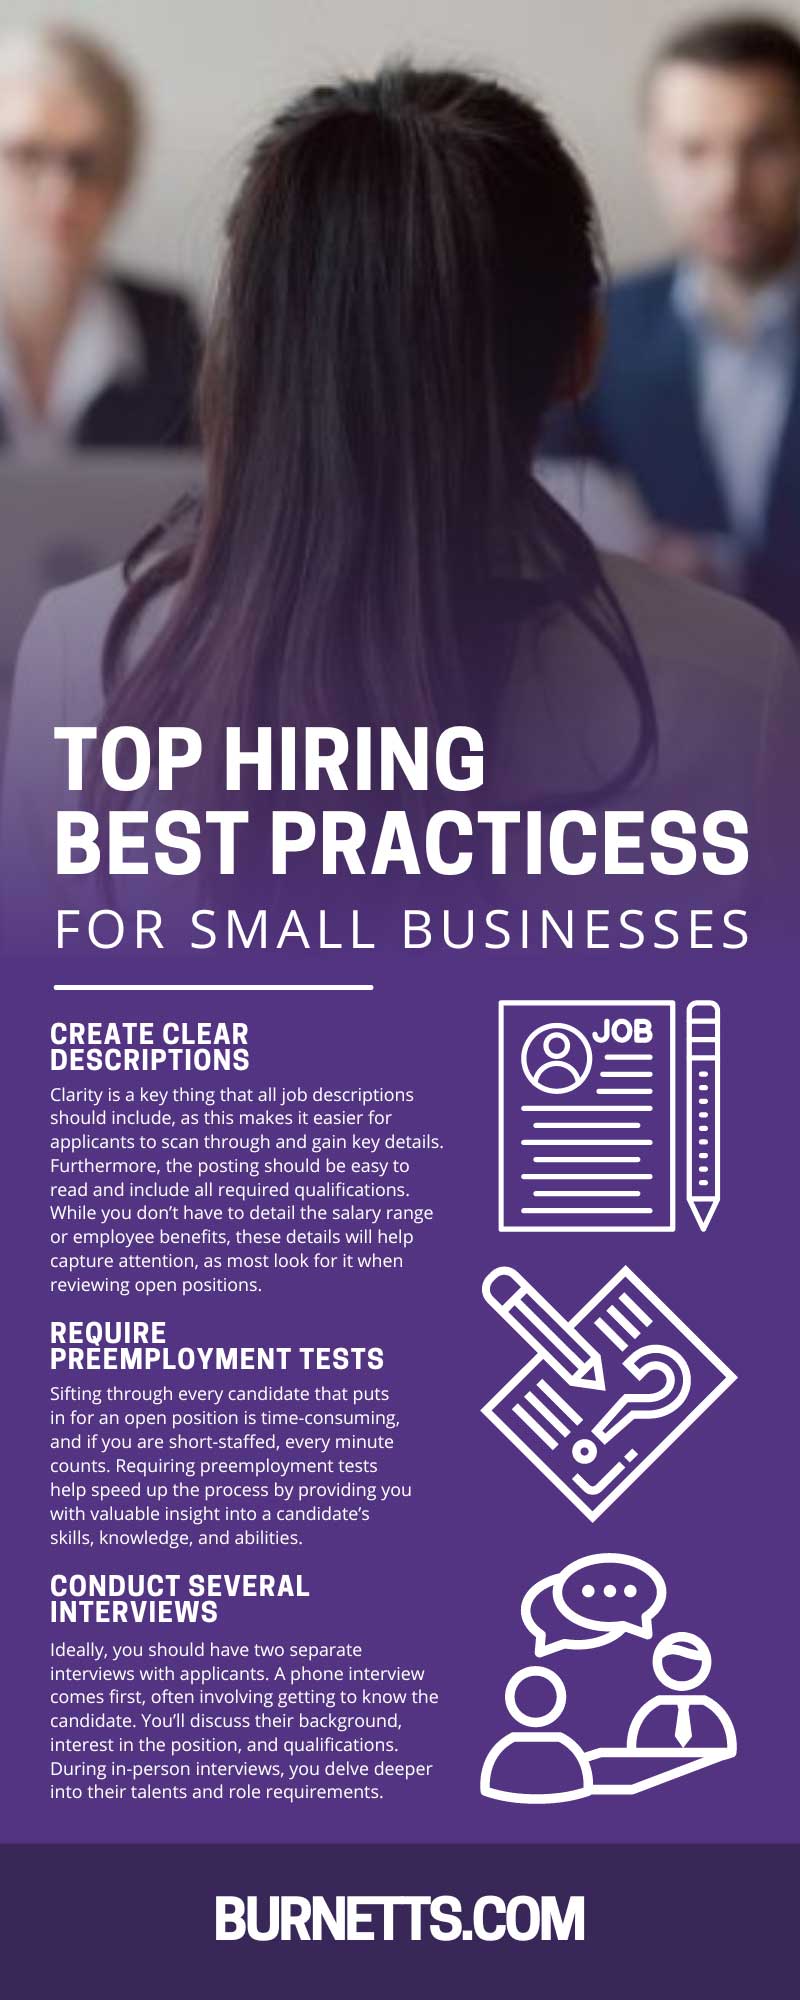 Top 7 Hiring Best Practices for Small Businesses